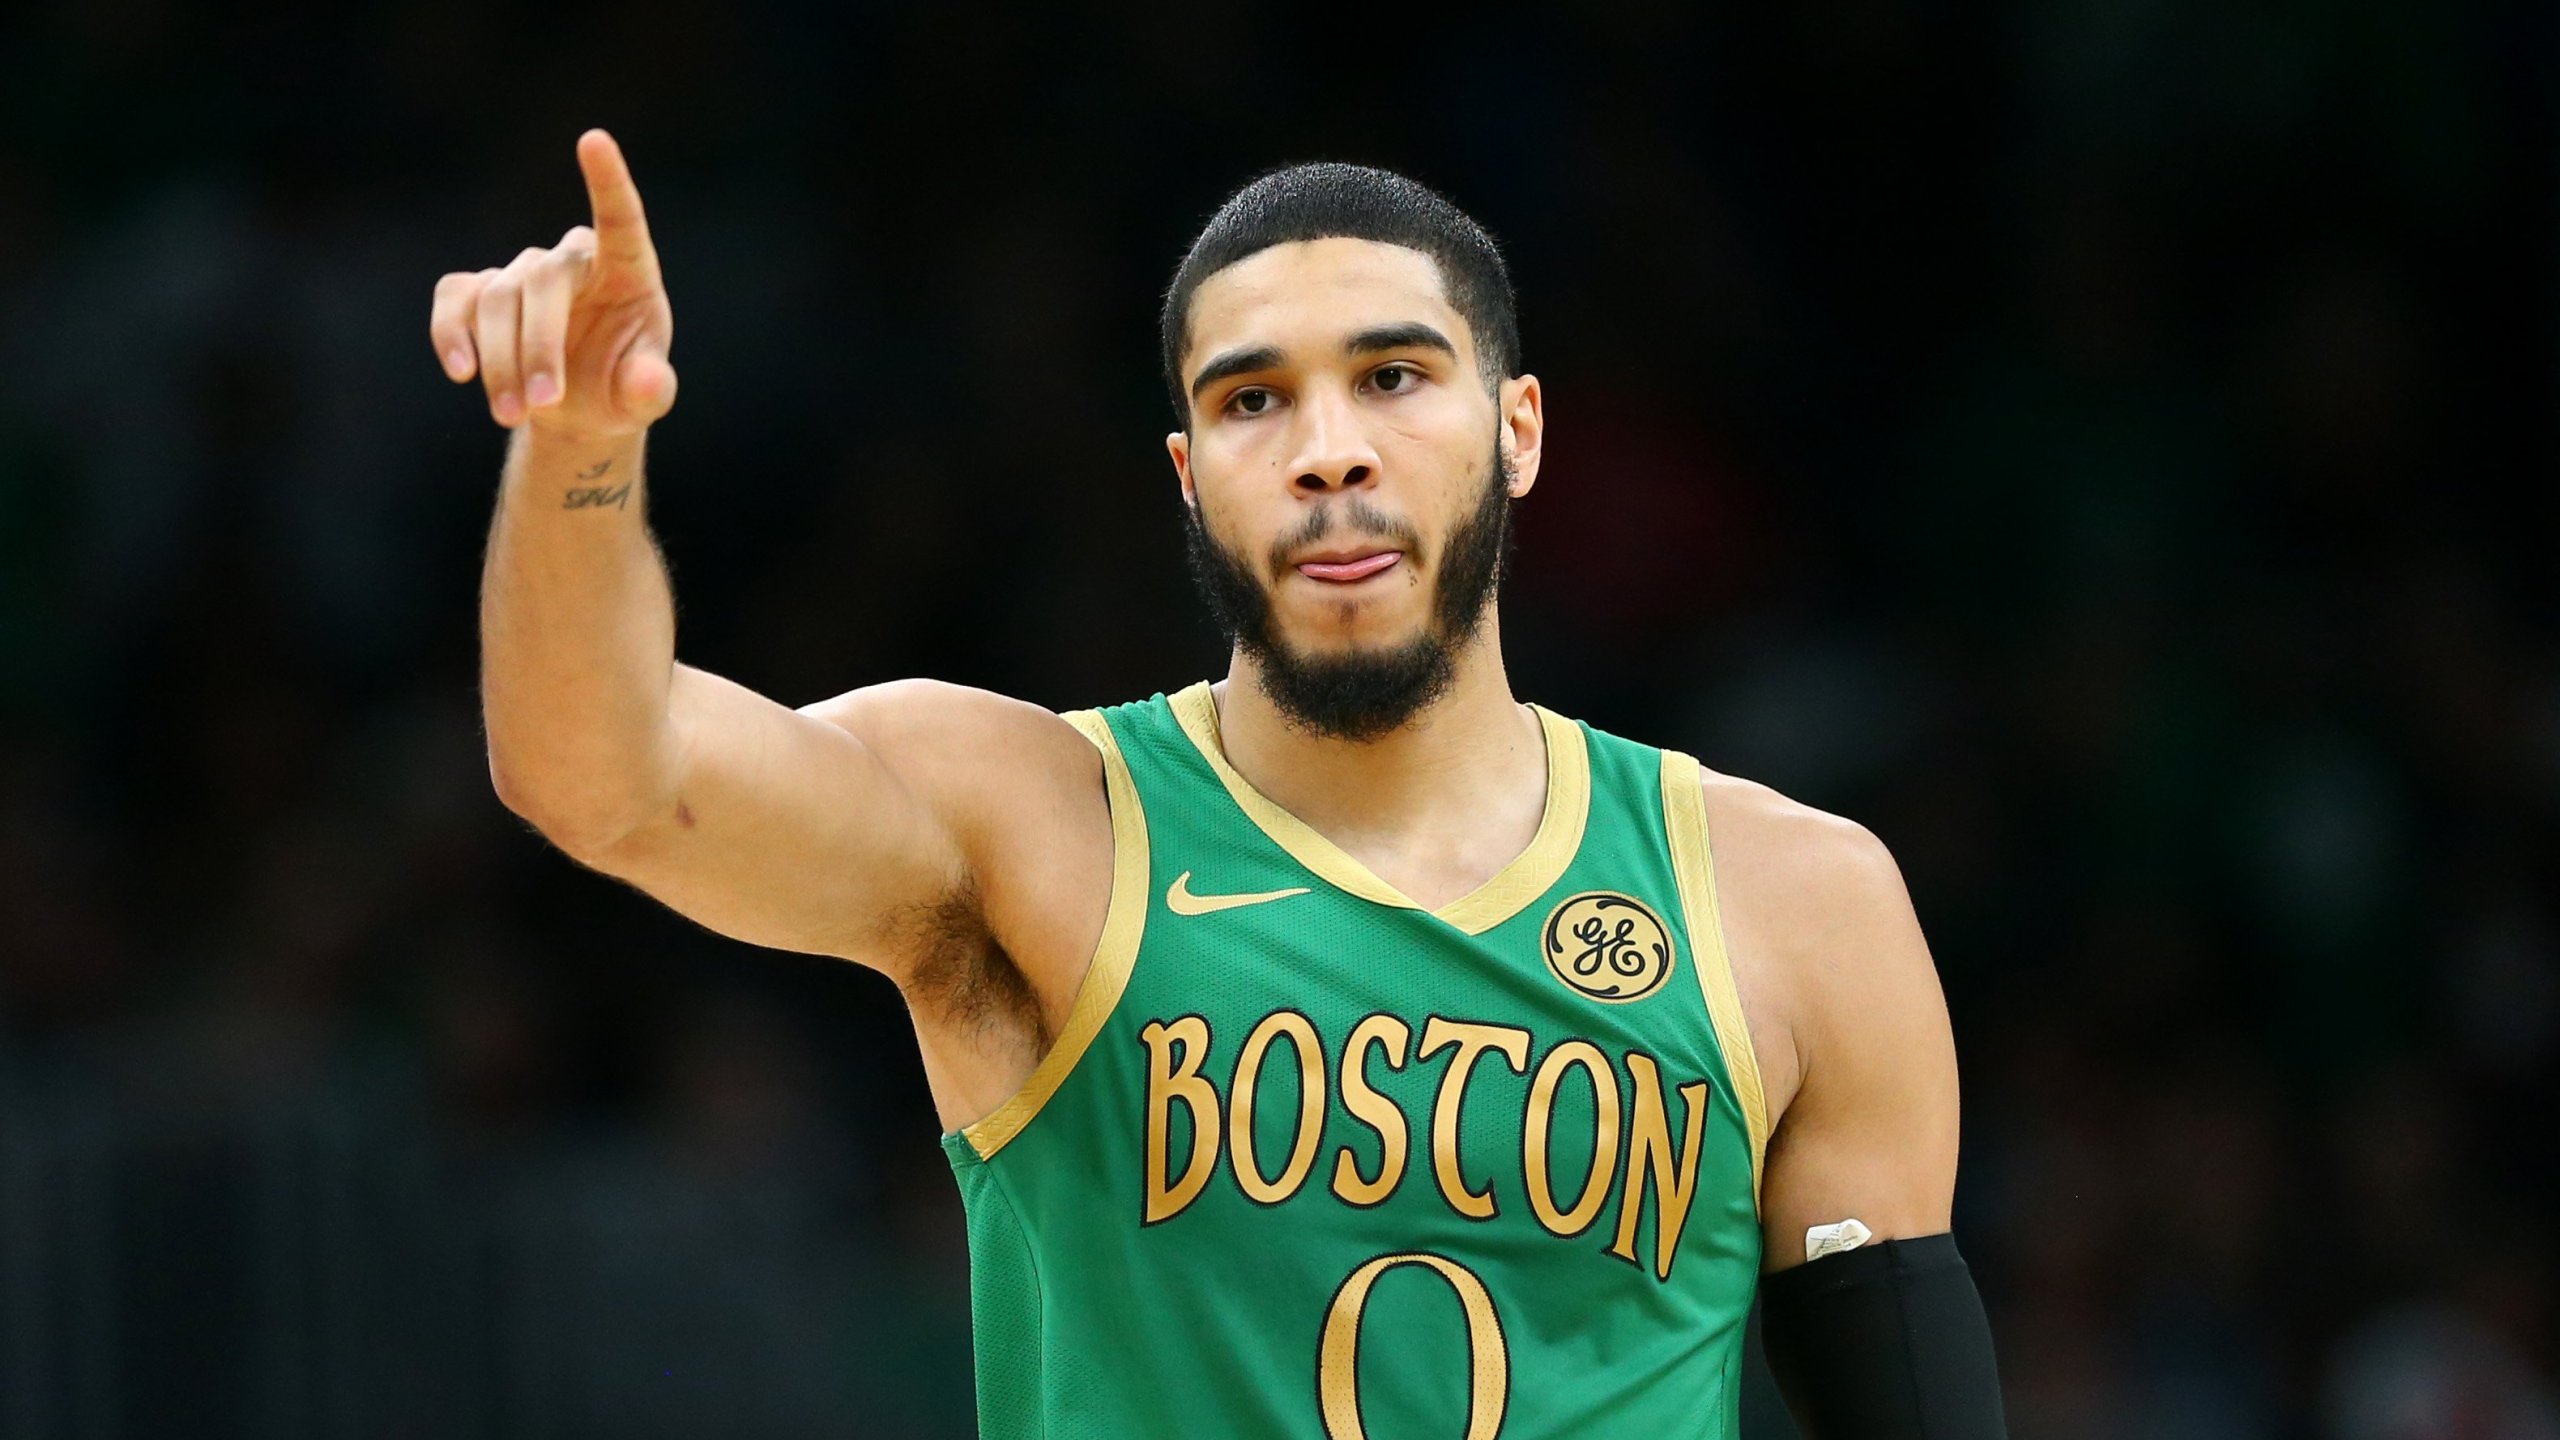 Chaminade grad Jayson Tatum named NBA All-Star for the first time ...